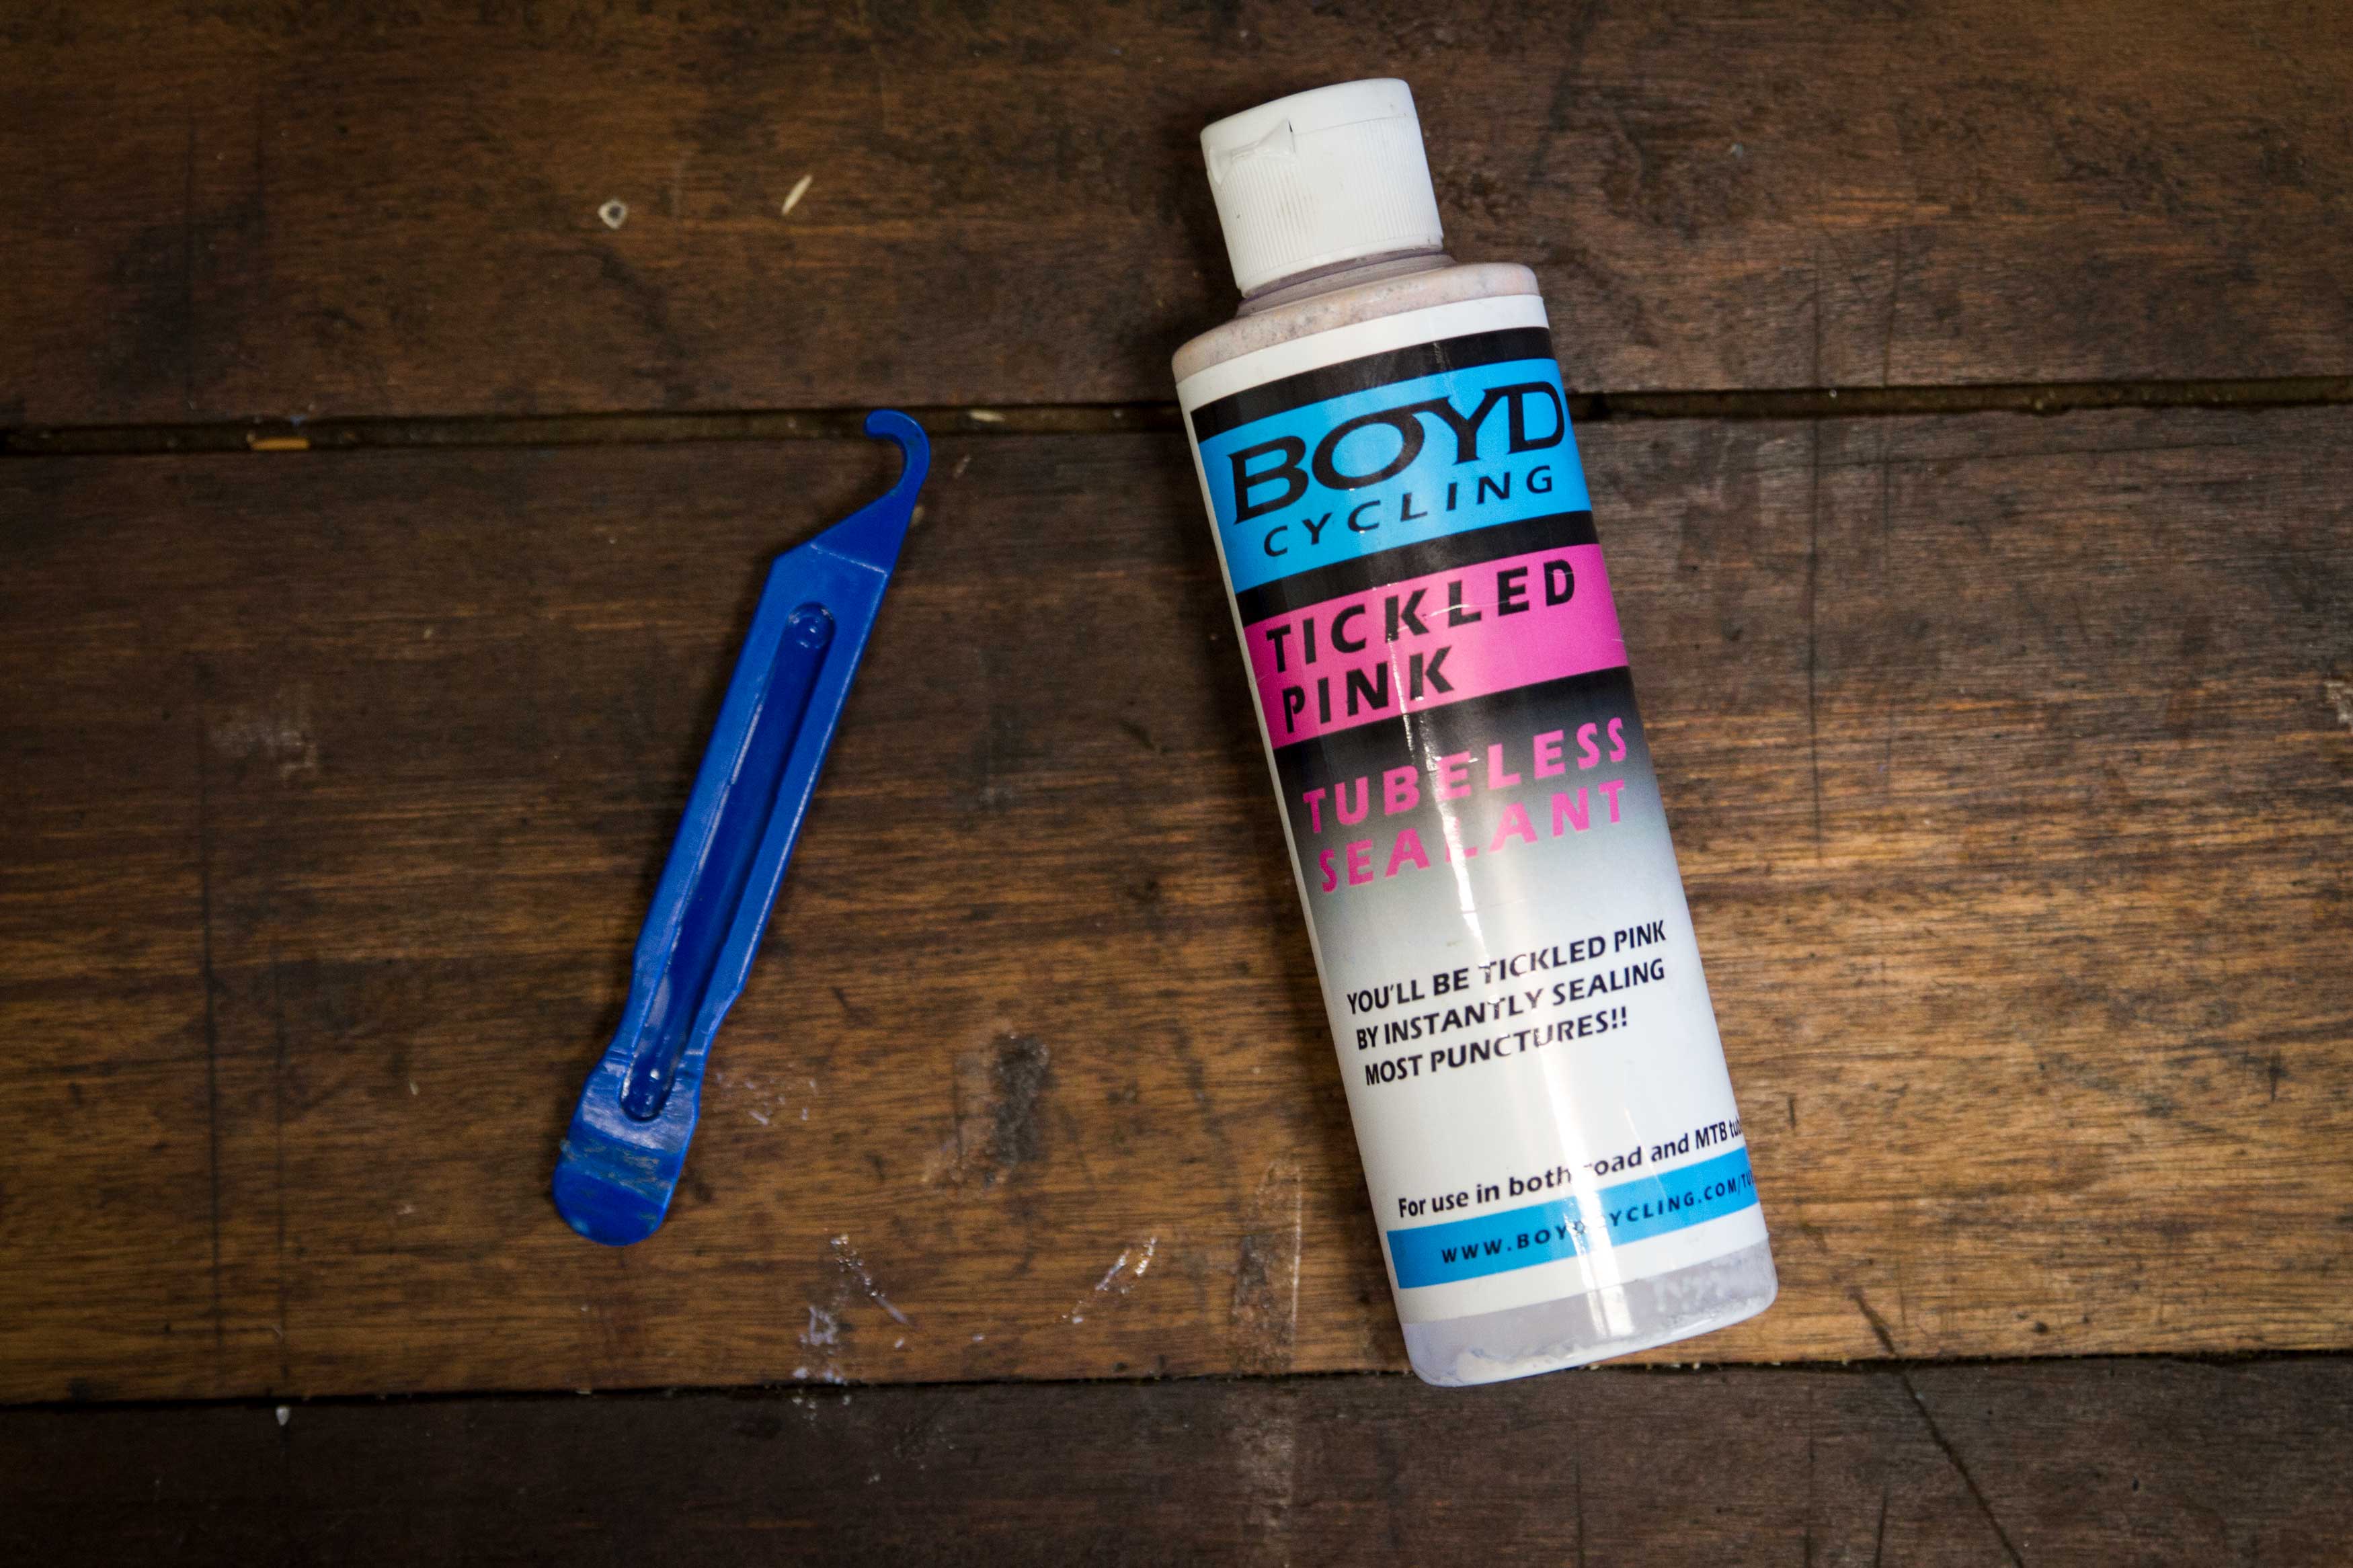 Review: Boyd Cycling's Tickled Pink Tubeless Sealant